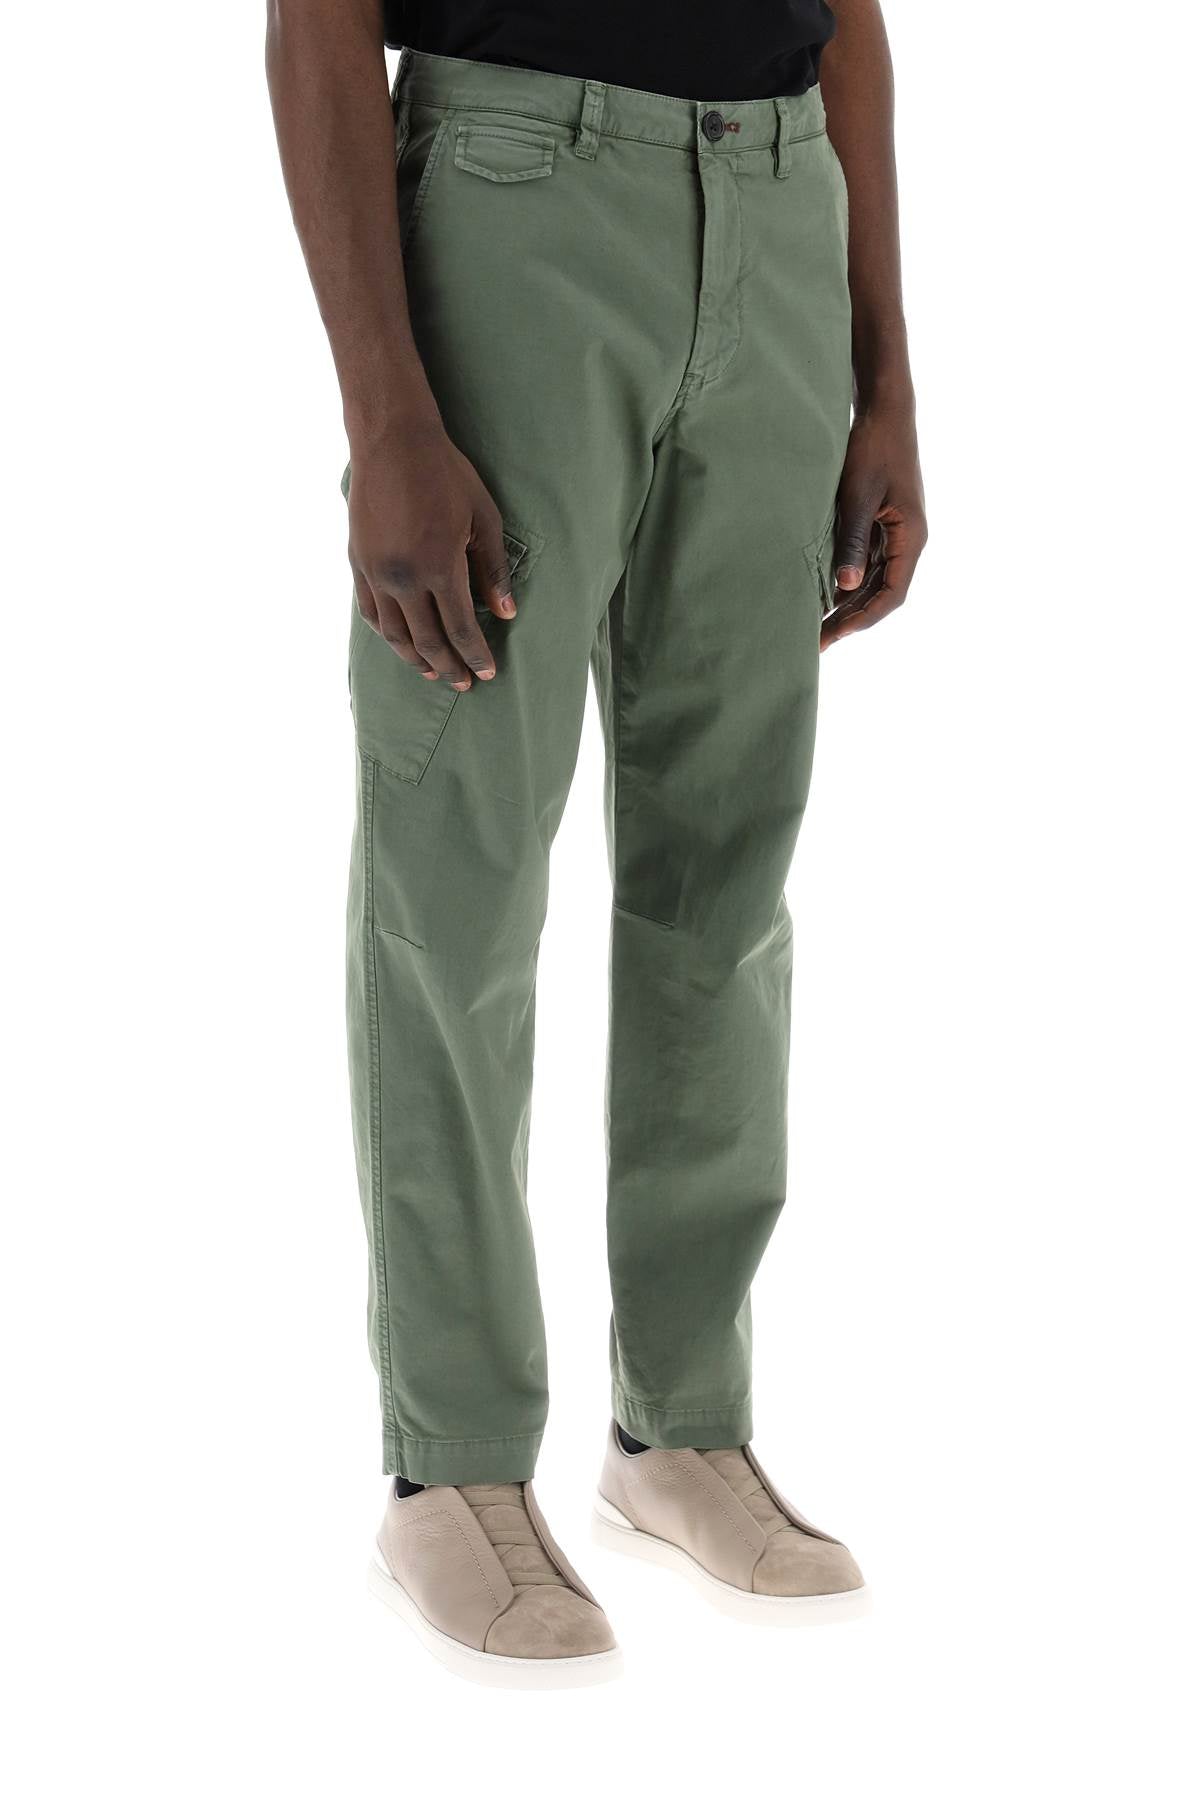 Ps paul smith stretch cotton cargo pants for men/w-1